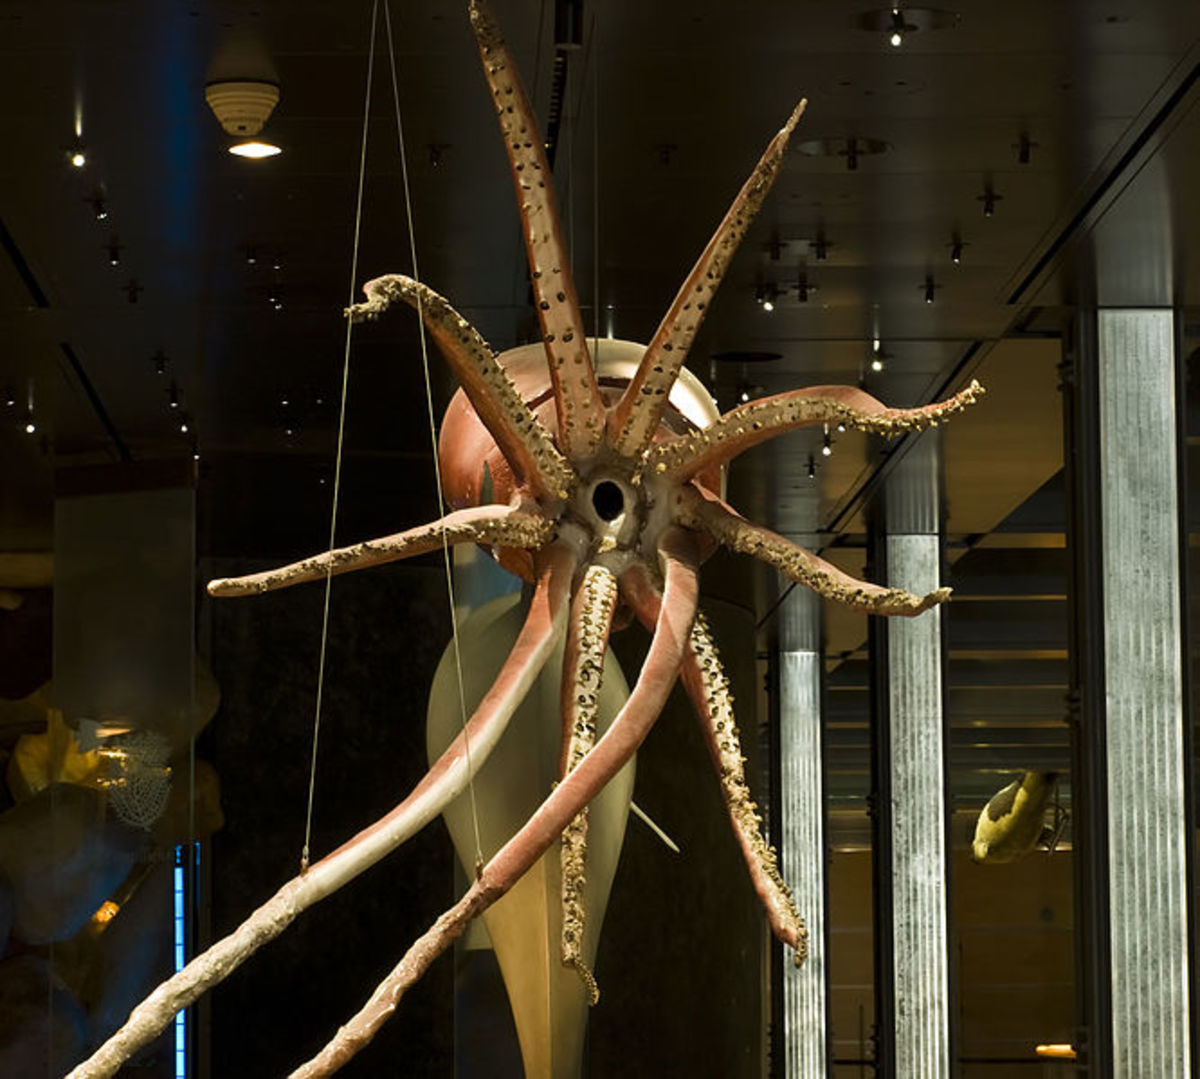 A plastinated giant squid in the French National Museum of Natural History.